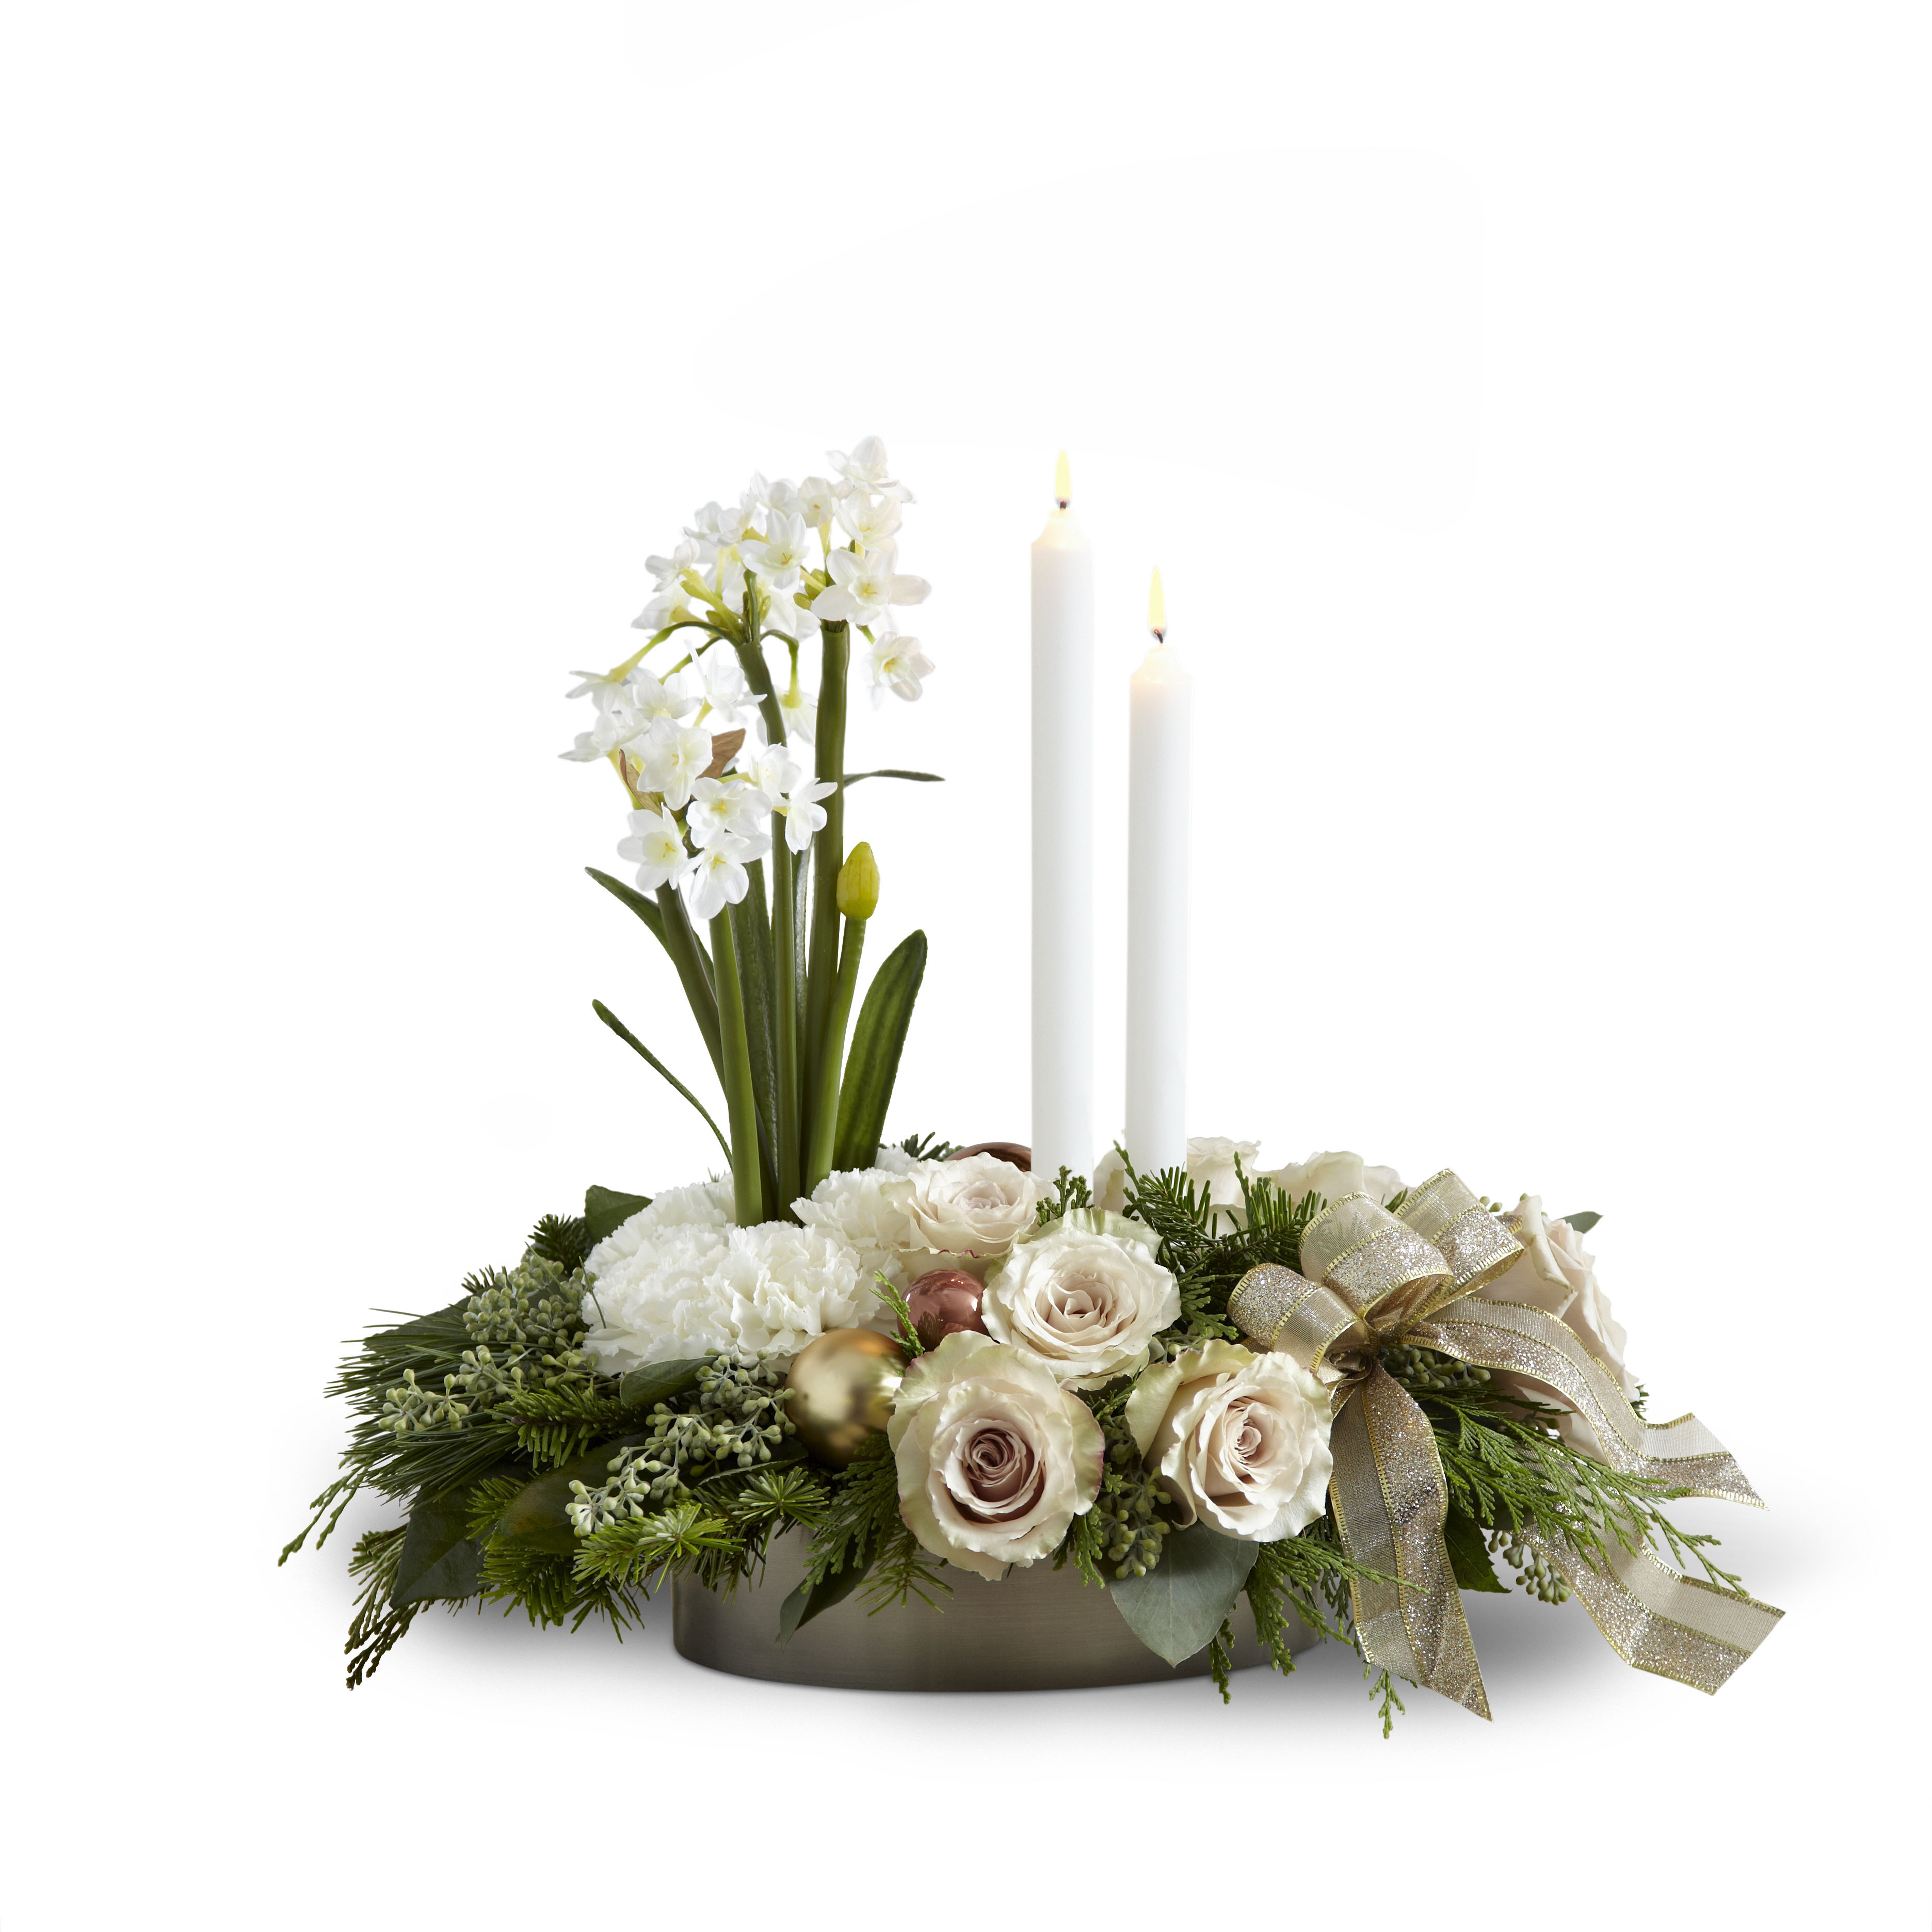 The FTD Glowing Elegance Centerpiece